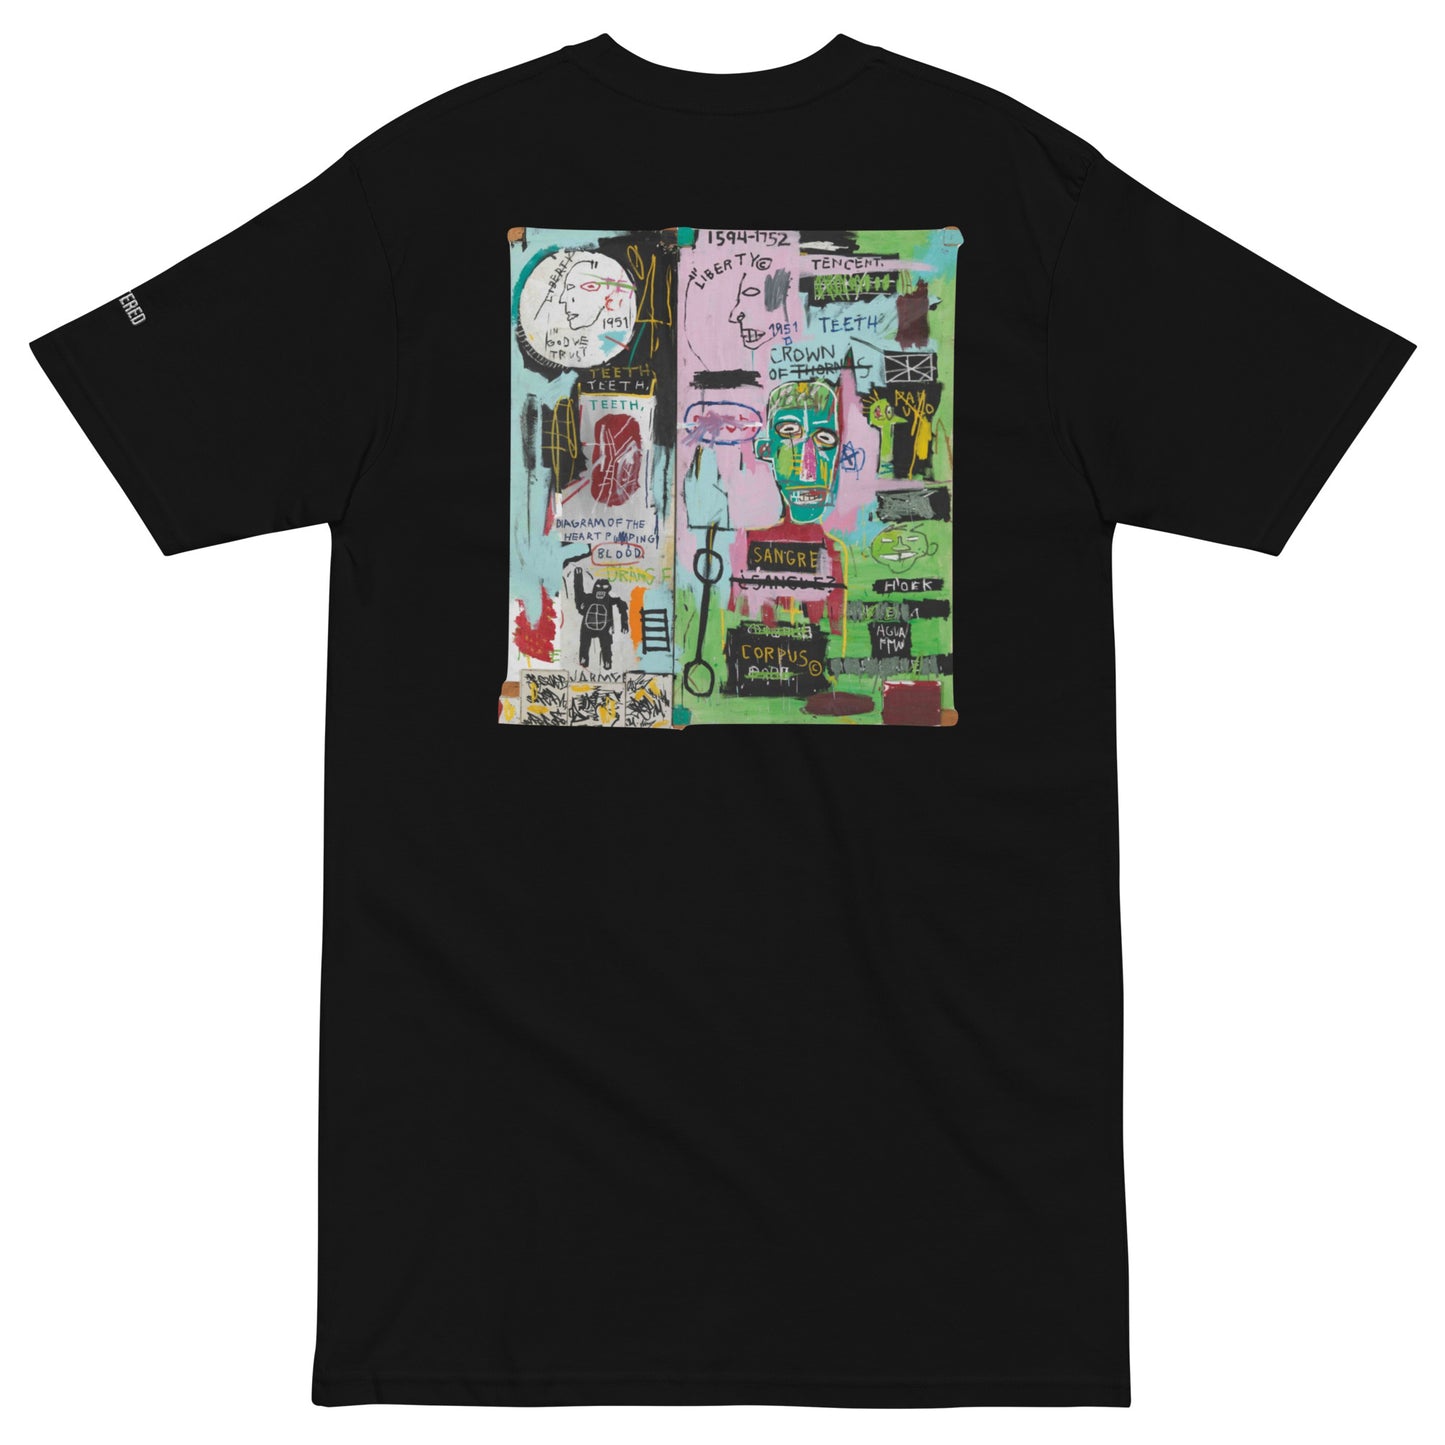 Jean-Michel Basquiat "In Italian" Artwork Embroidered and Printed Premium Black Streetwear T-Shirt Scattered